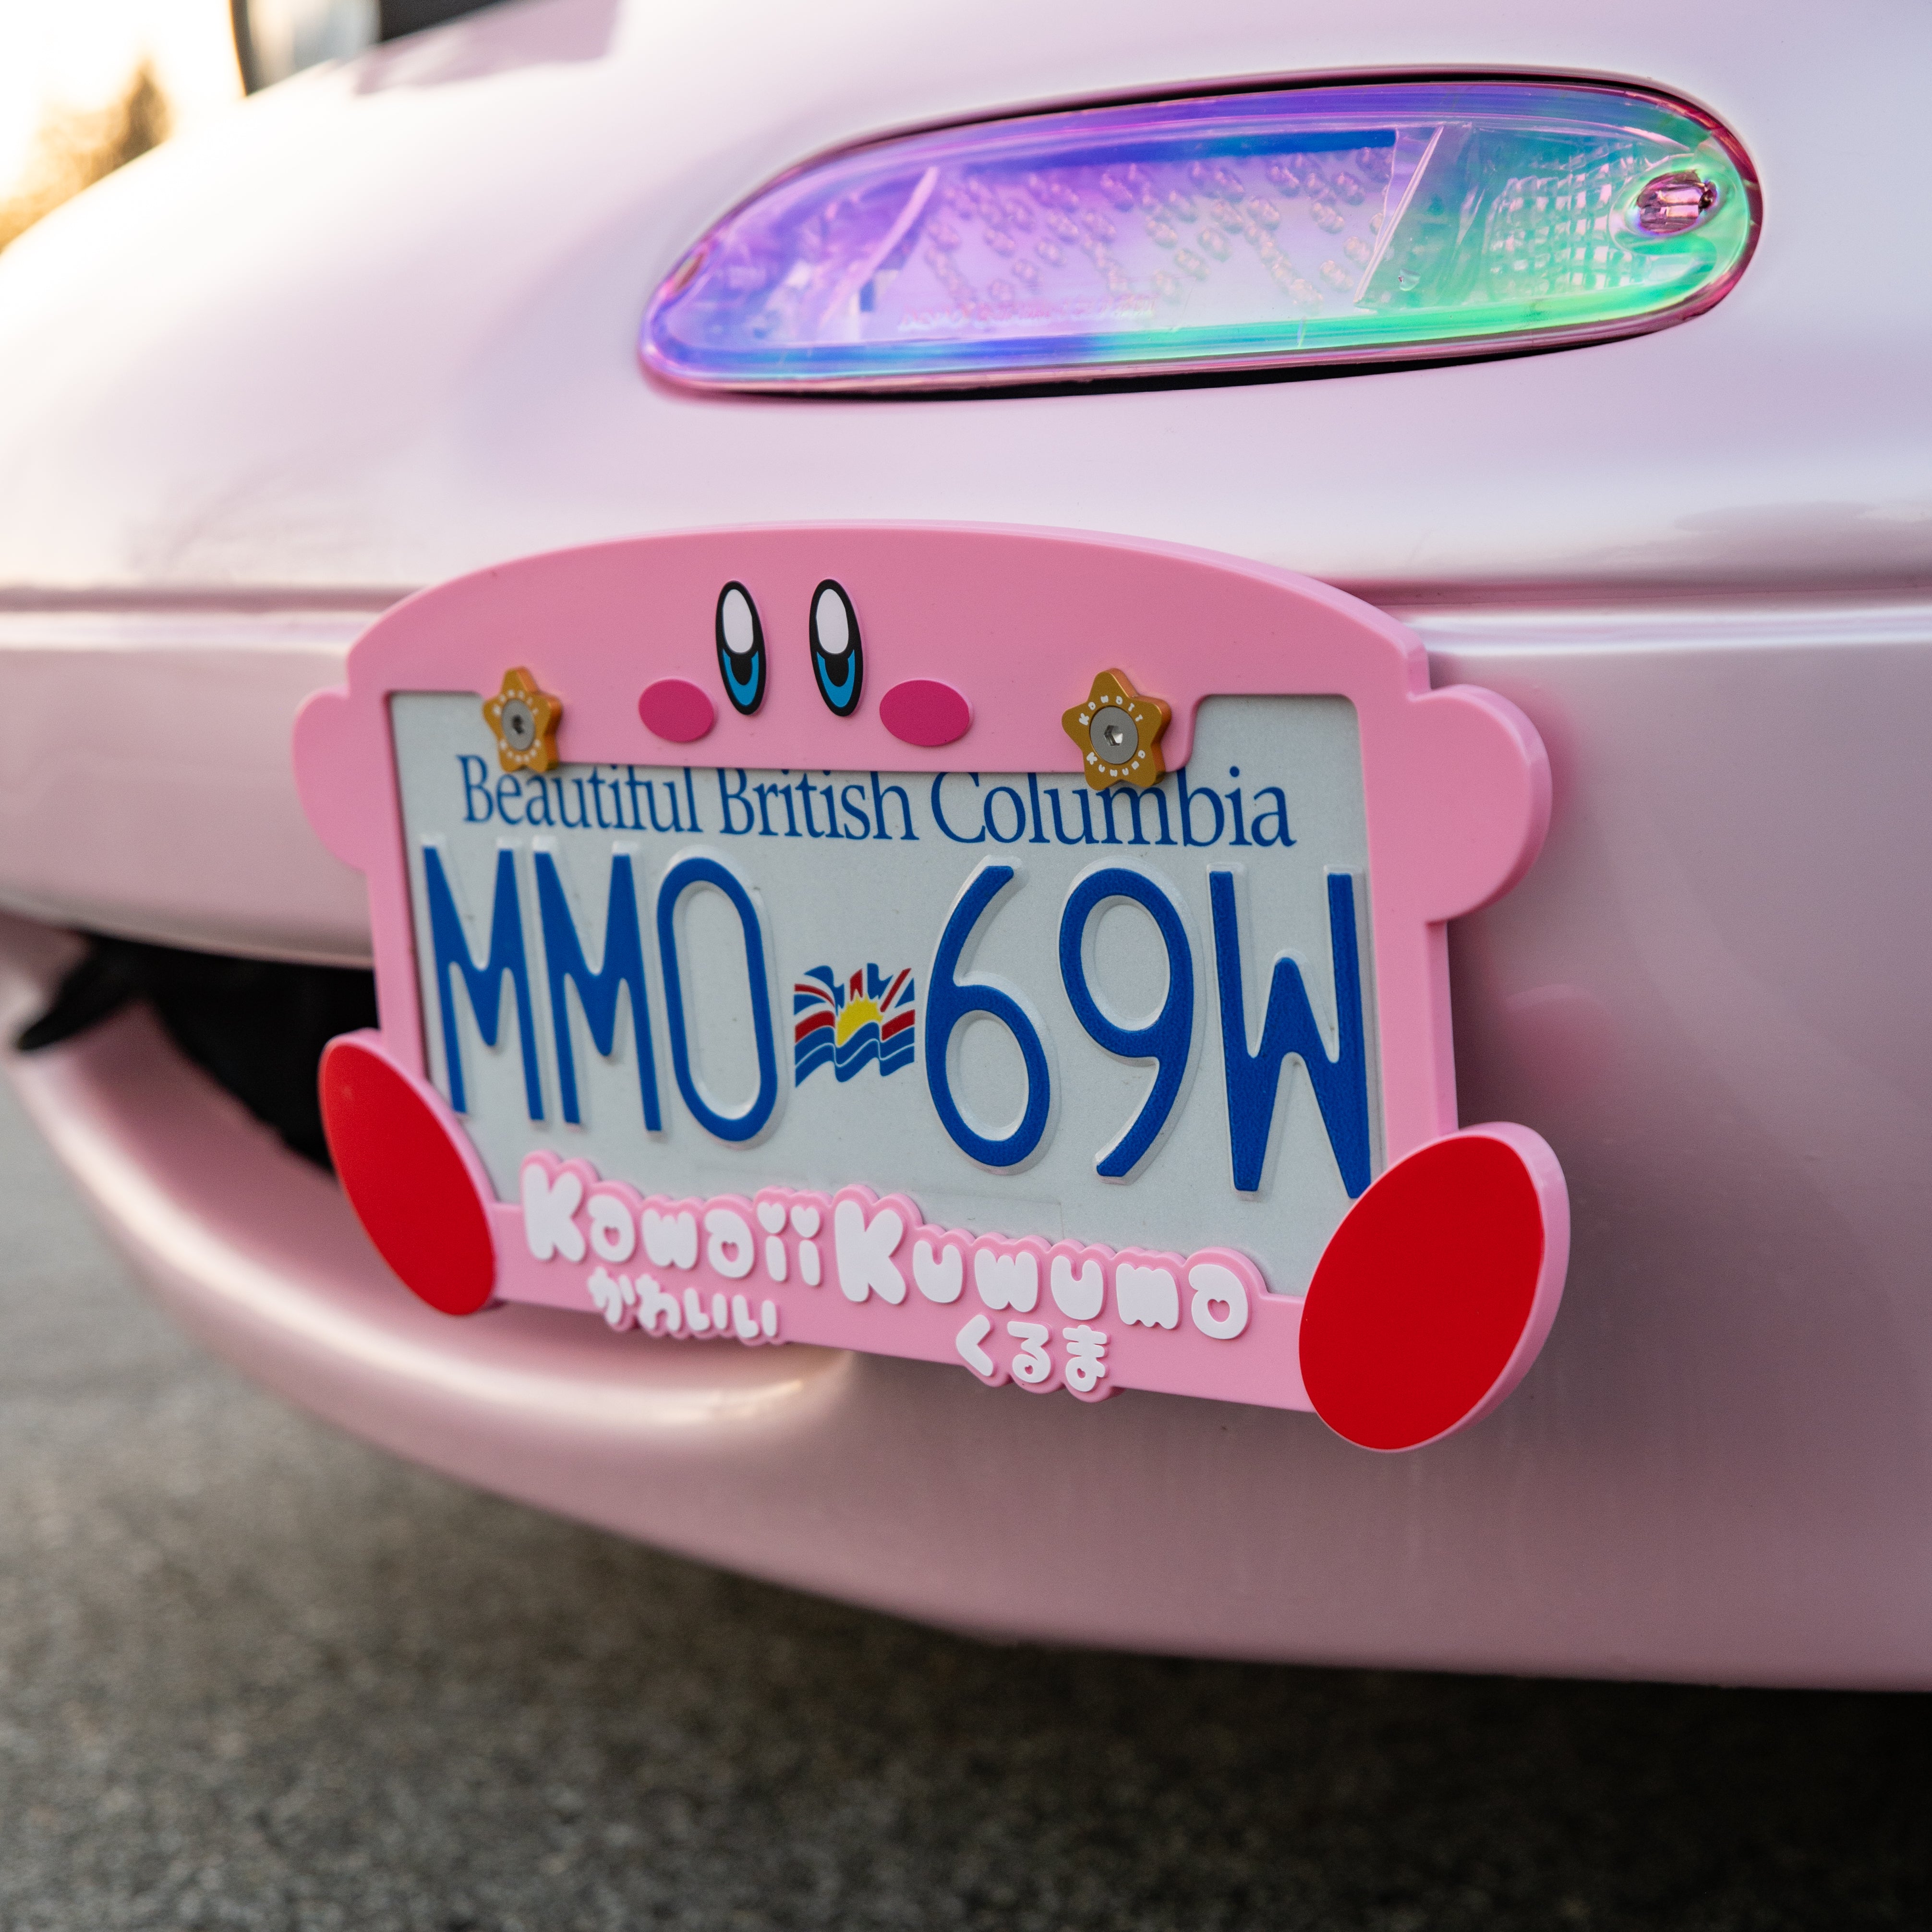 cute kirby license plate on a pink miata as seen on tiktok with gold or yellow star dress up hardware